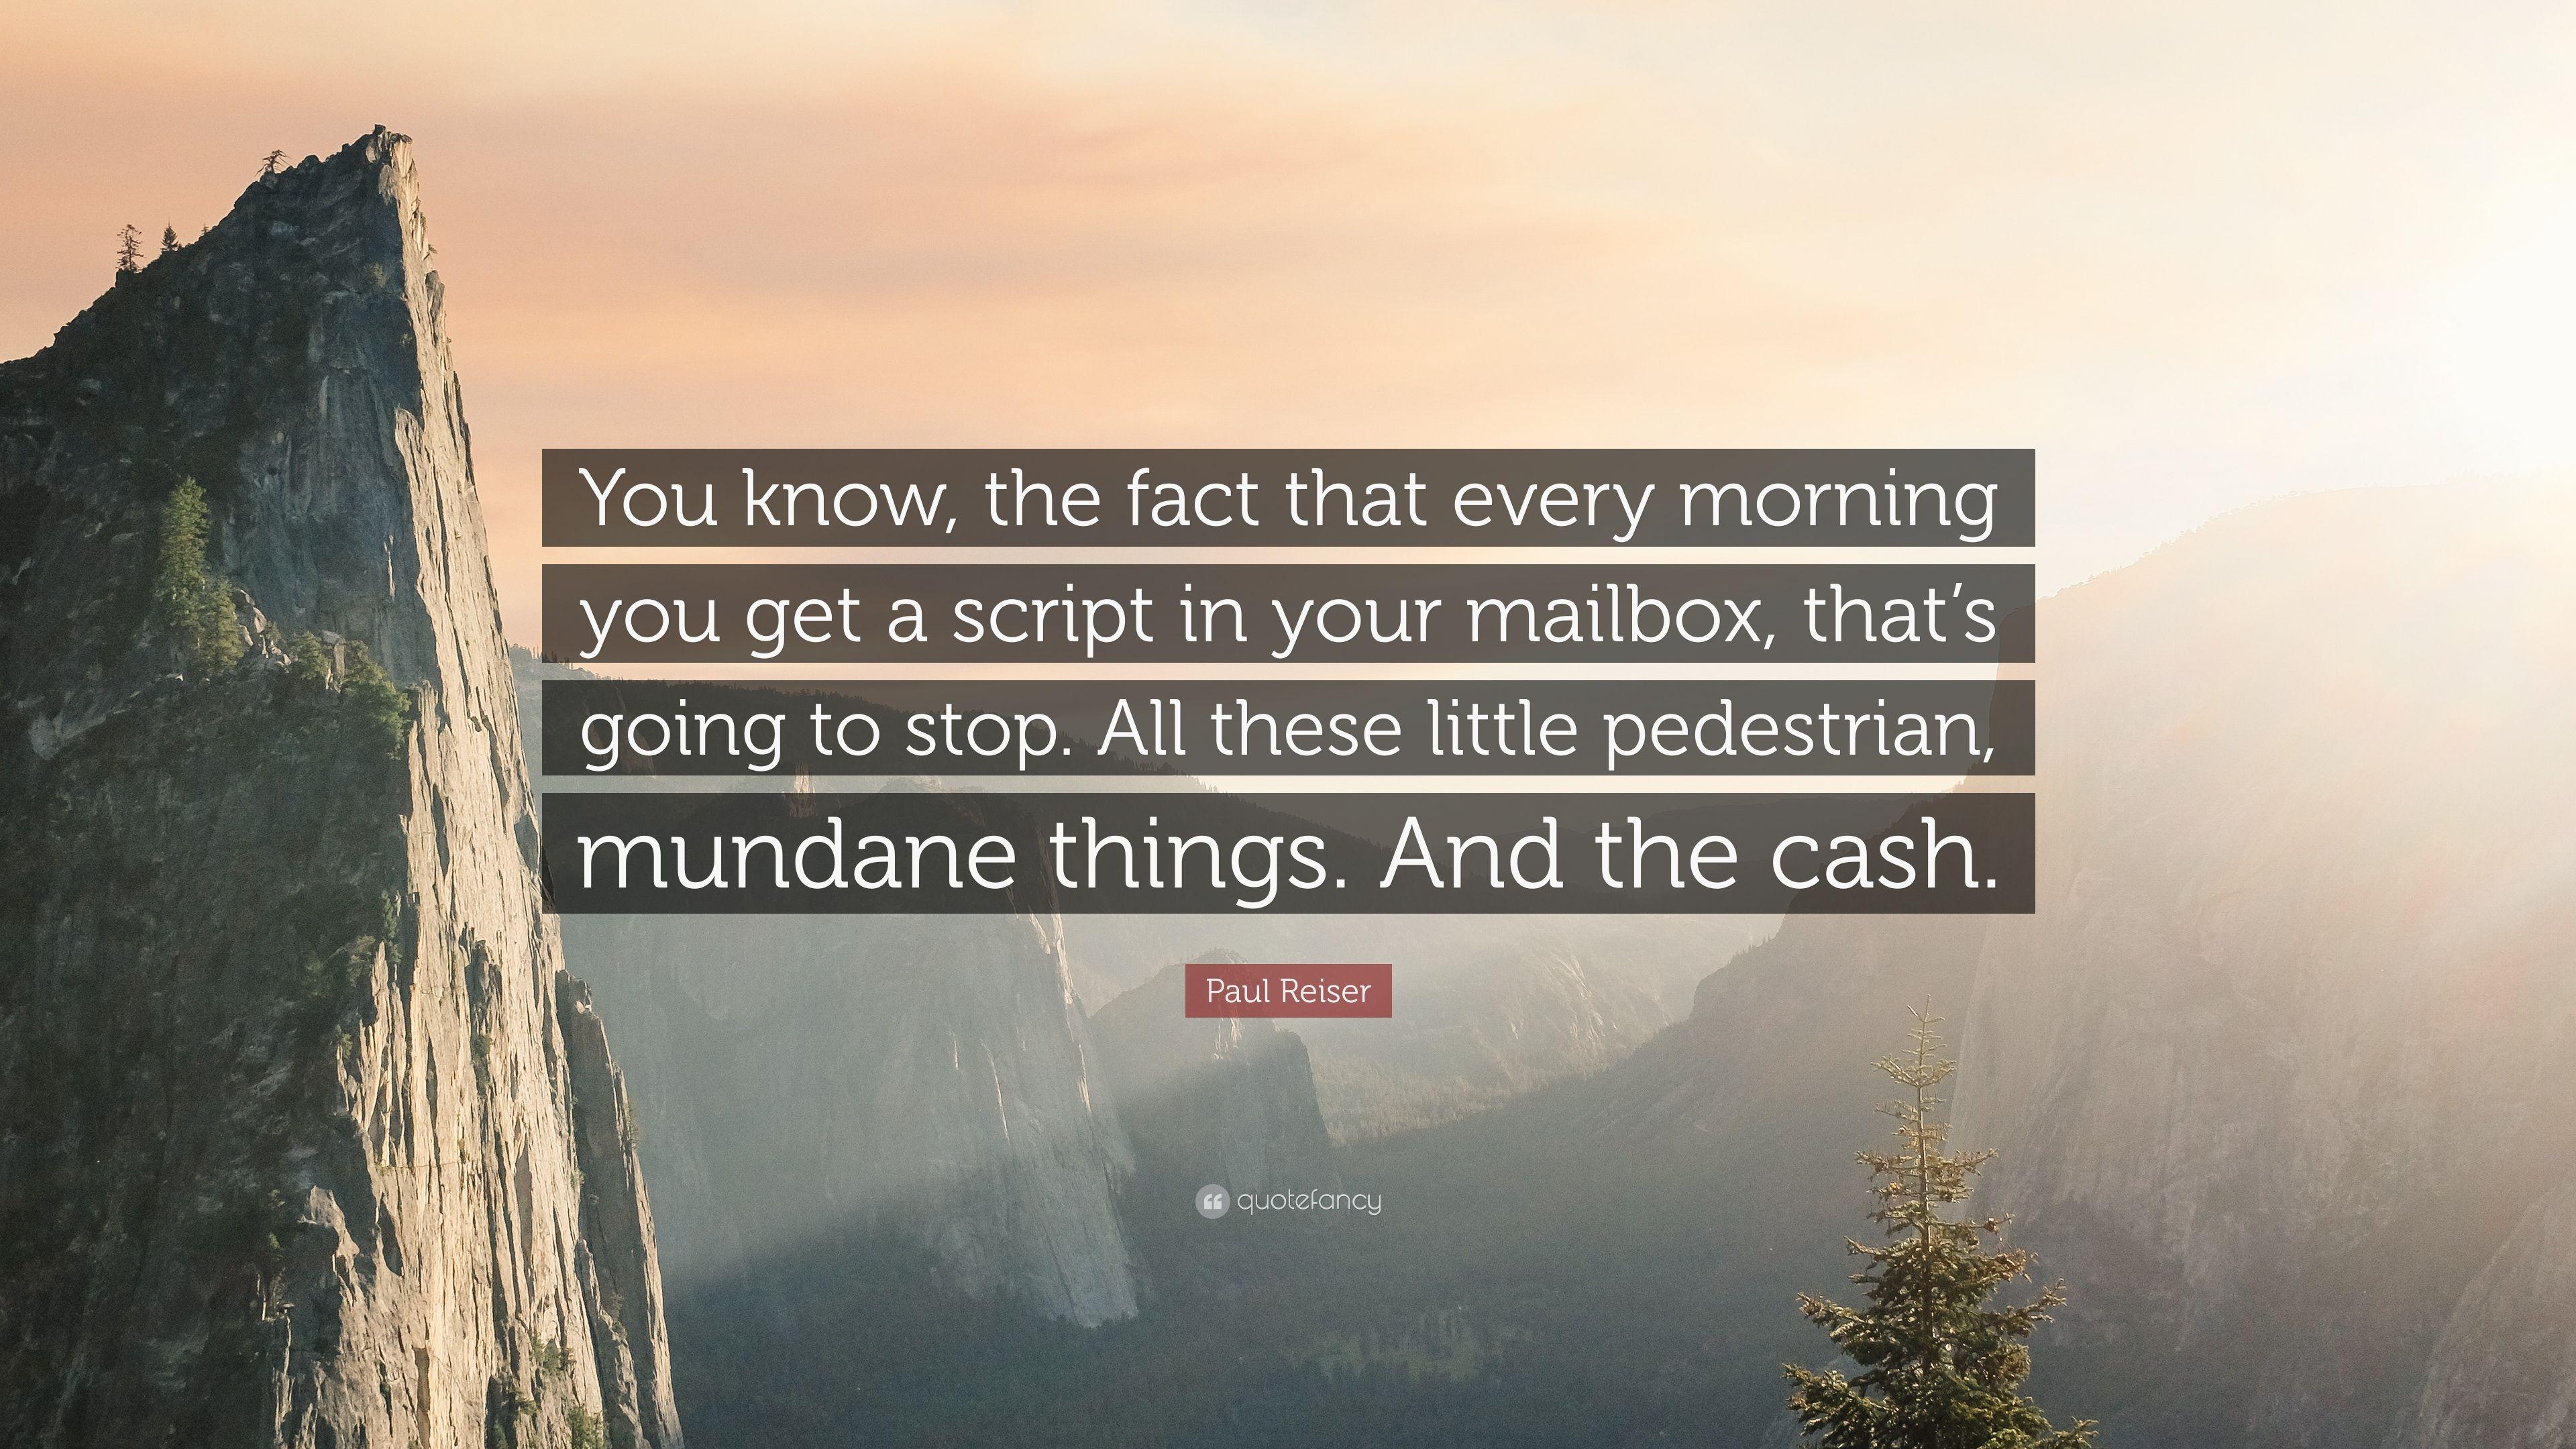 Paul Reiser Quote: “You know, the fact that every morning you get